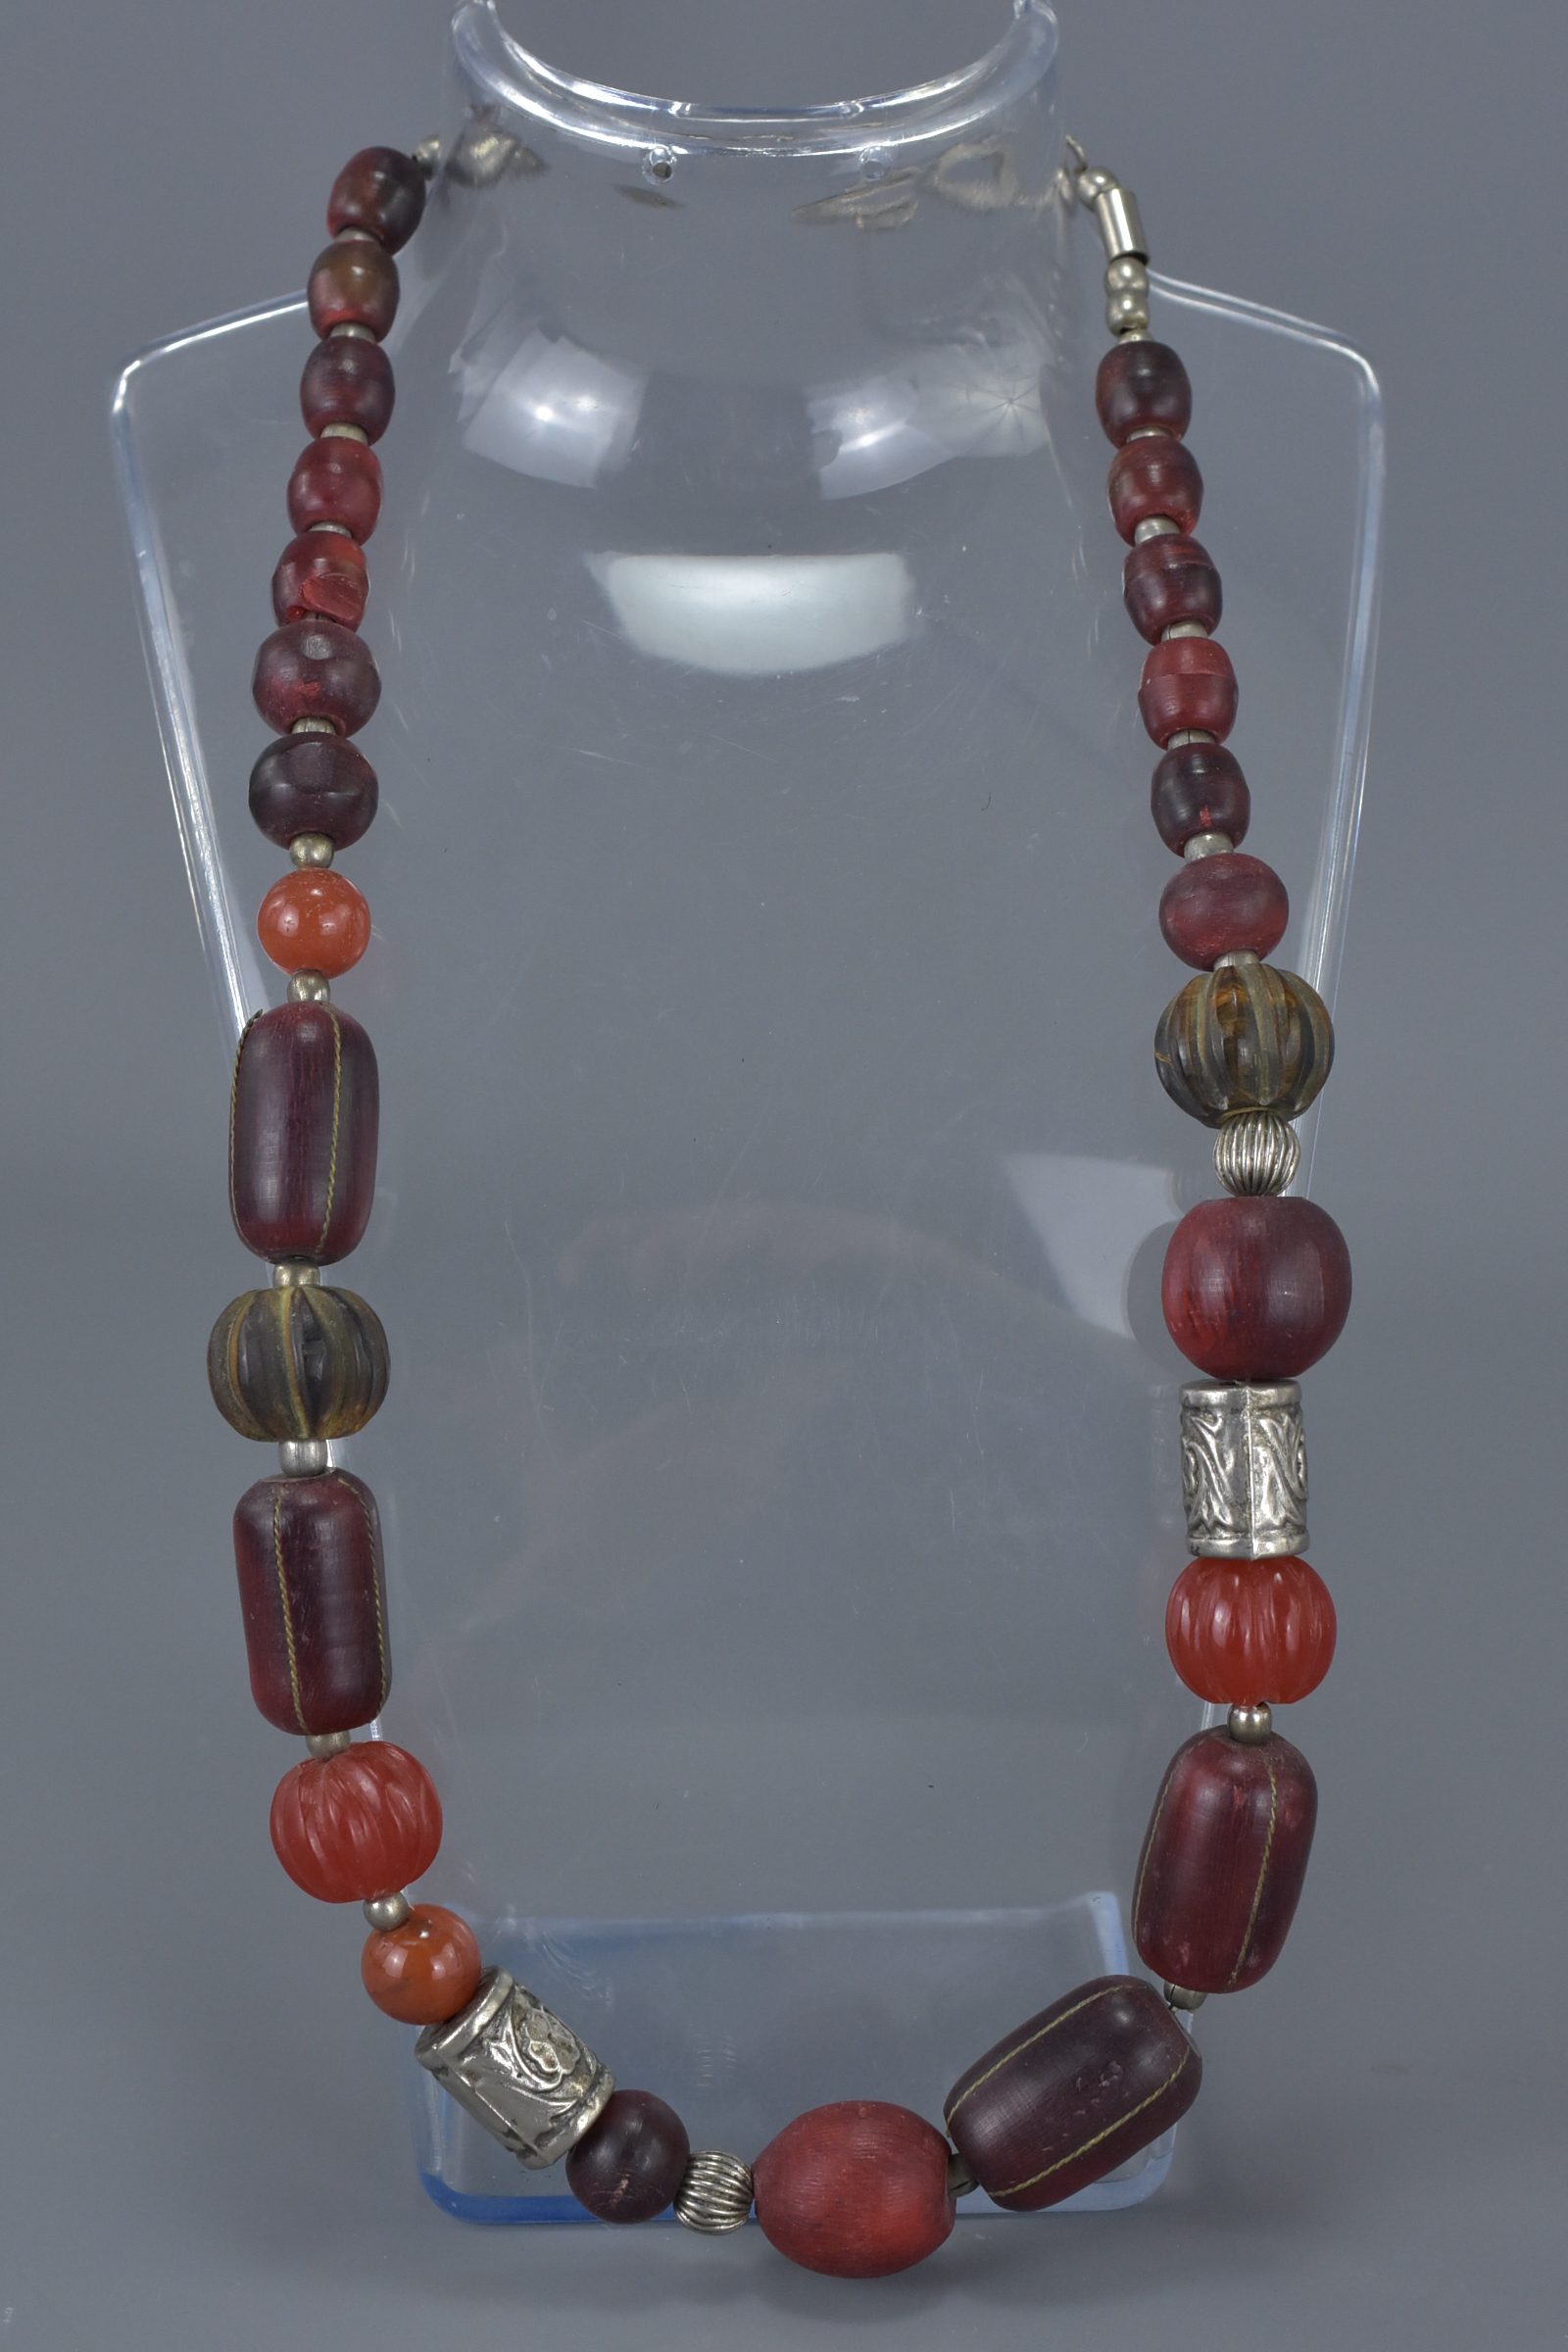 Two Ethnic Necklaces with wooden, resin, white metal and stone beads - Image 2 of 3